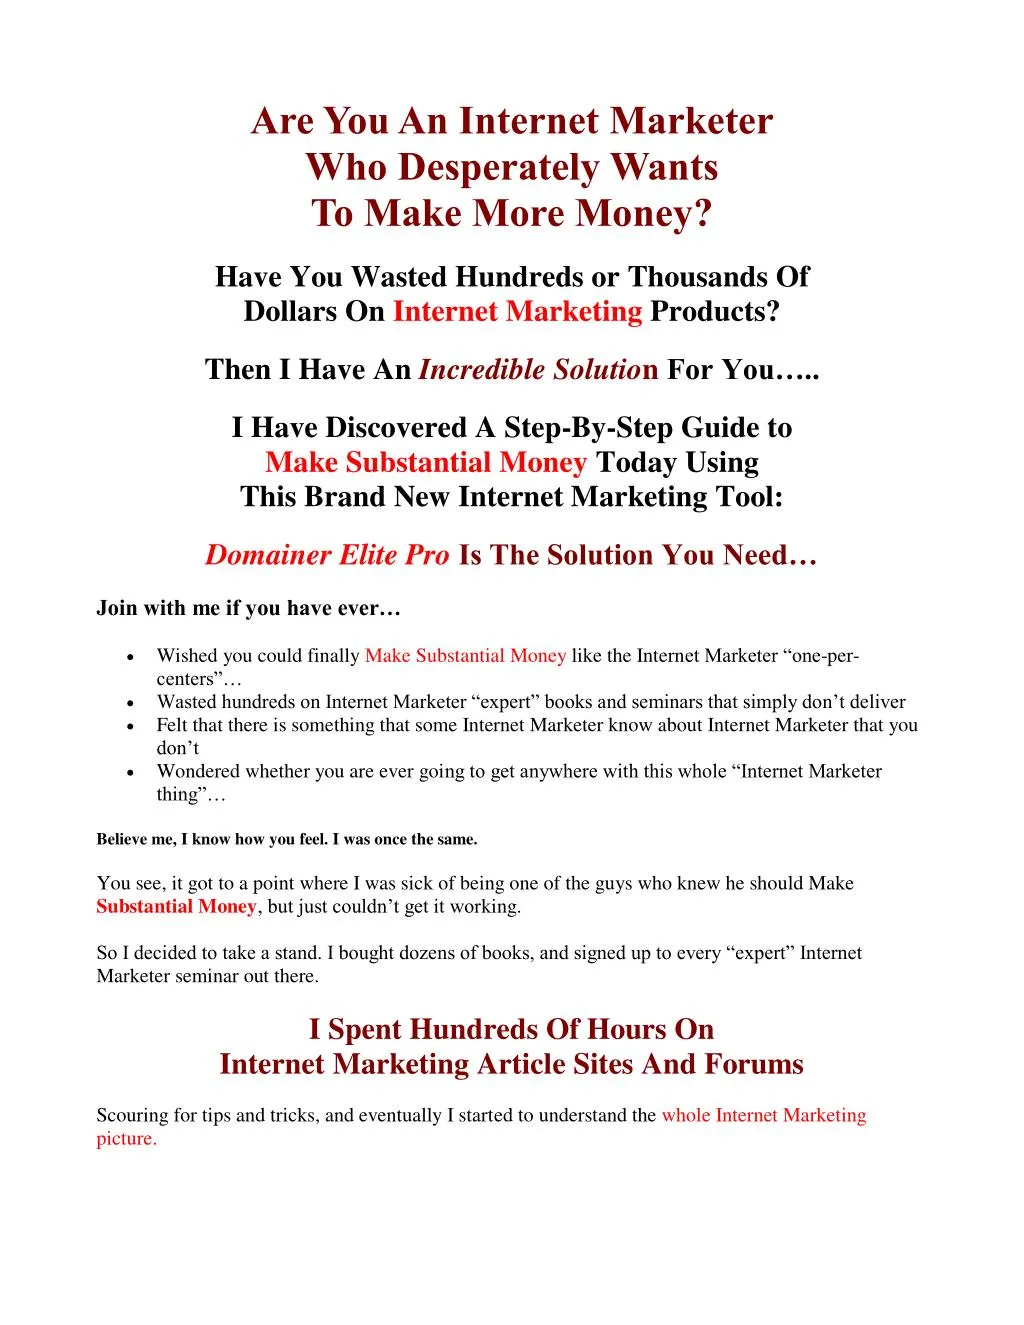 are you an internet marketer who desperately